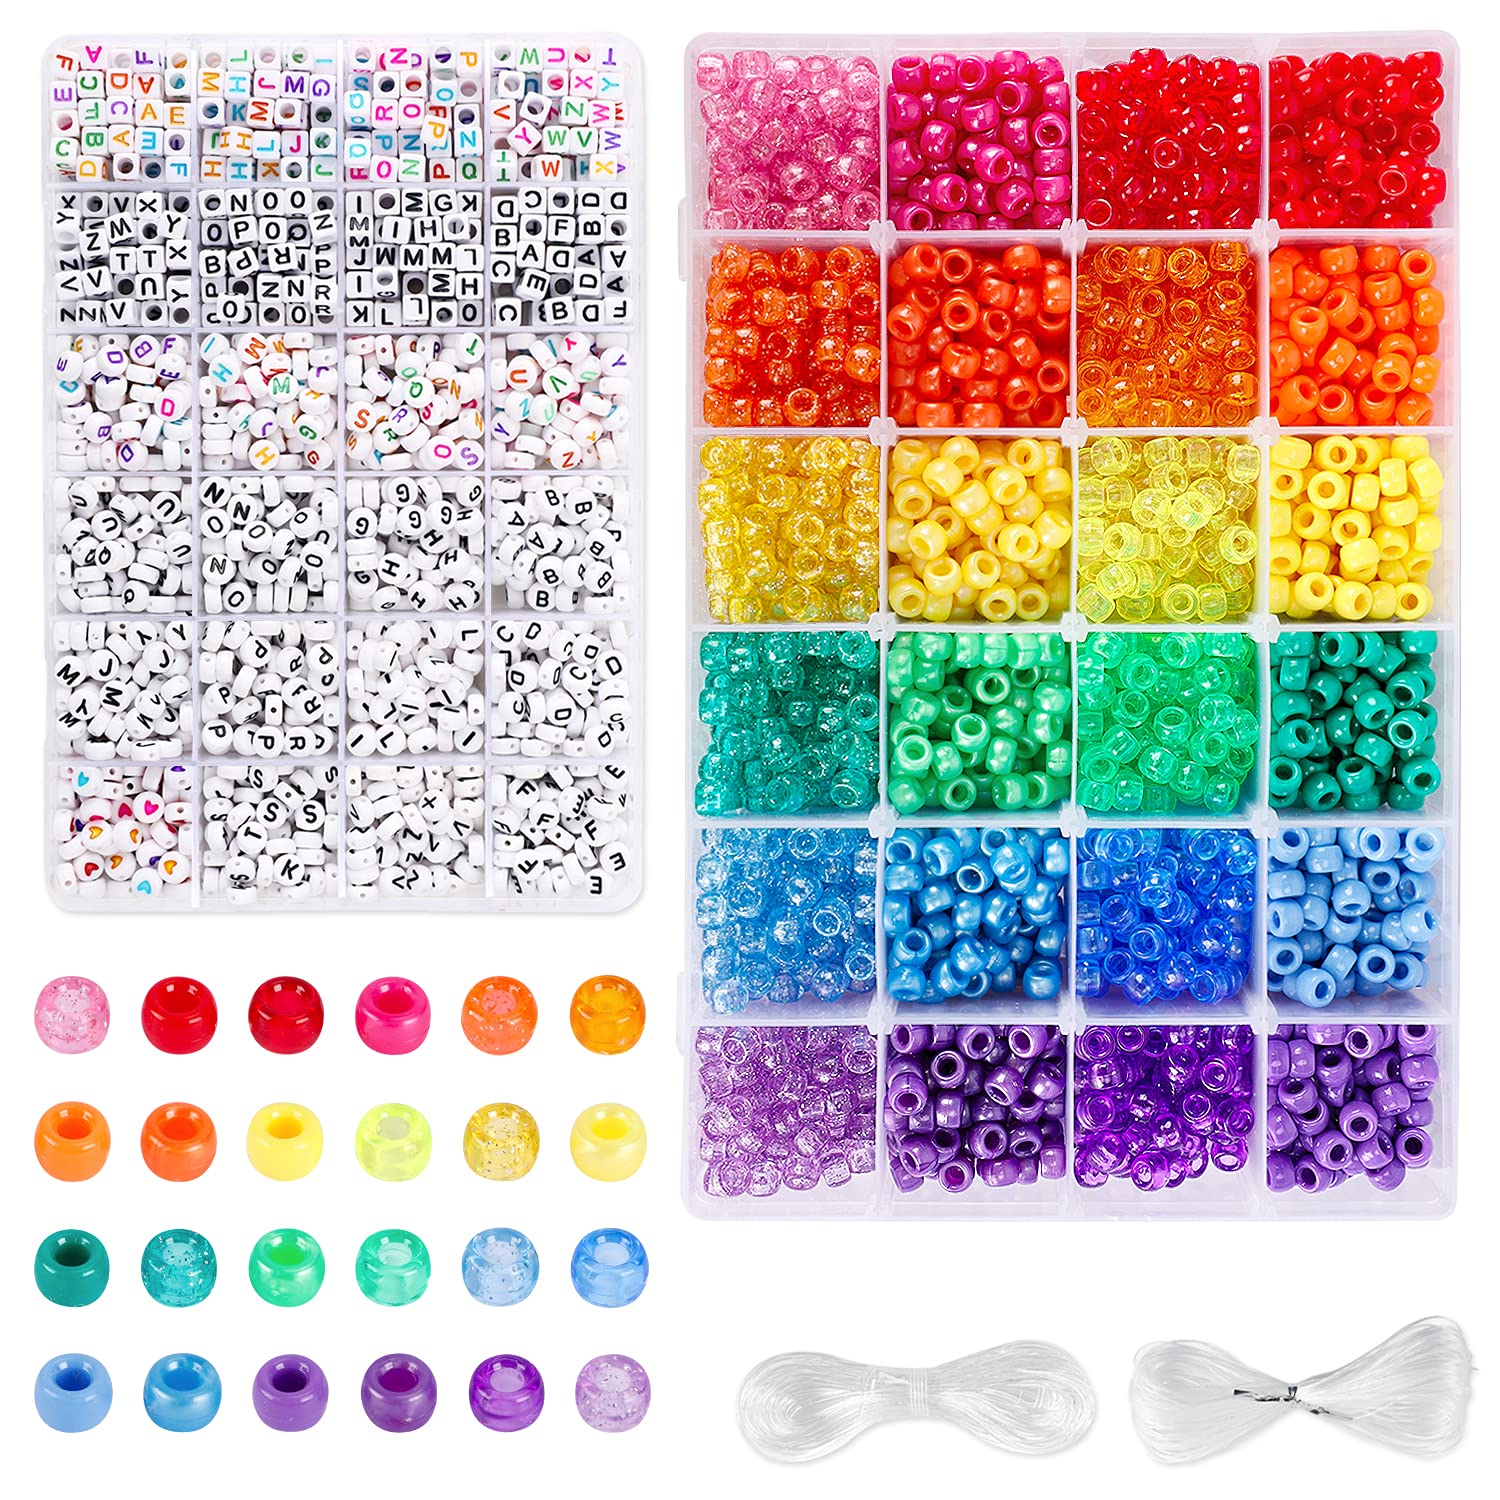 Multicolor Glitter Pony Beads - 9mm - 300/Pack